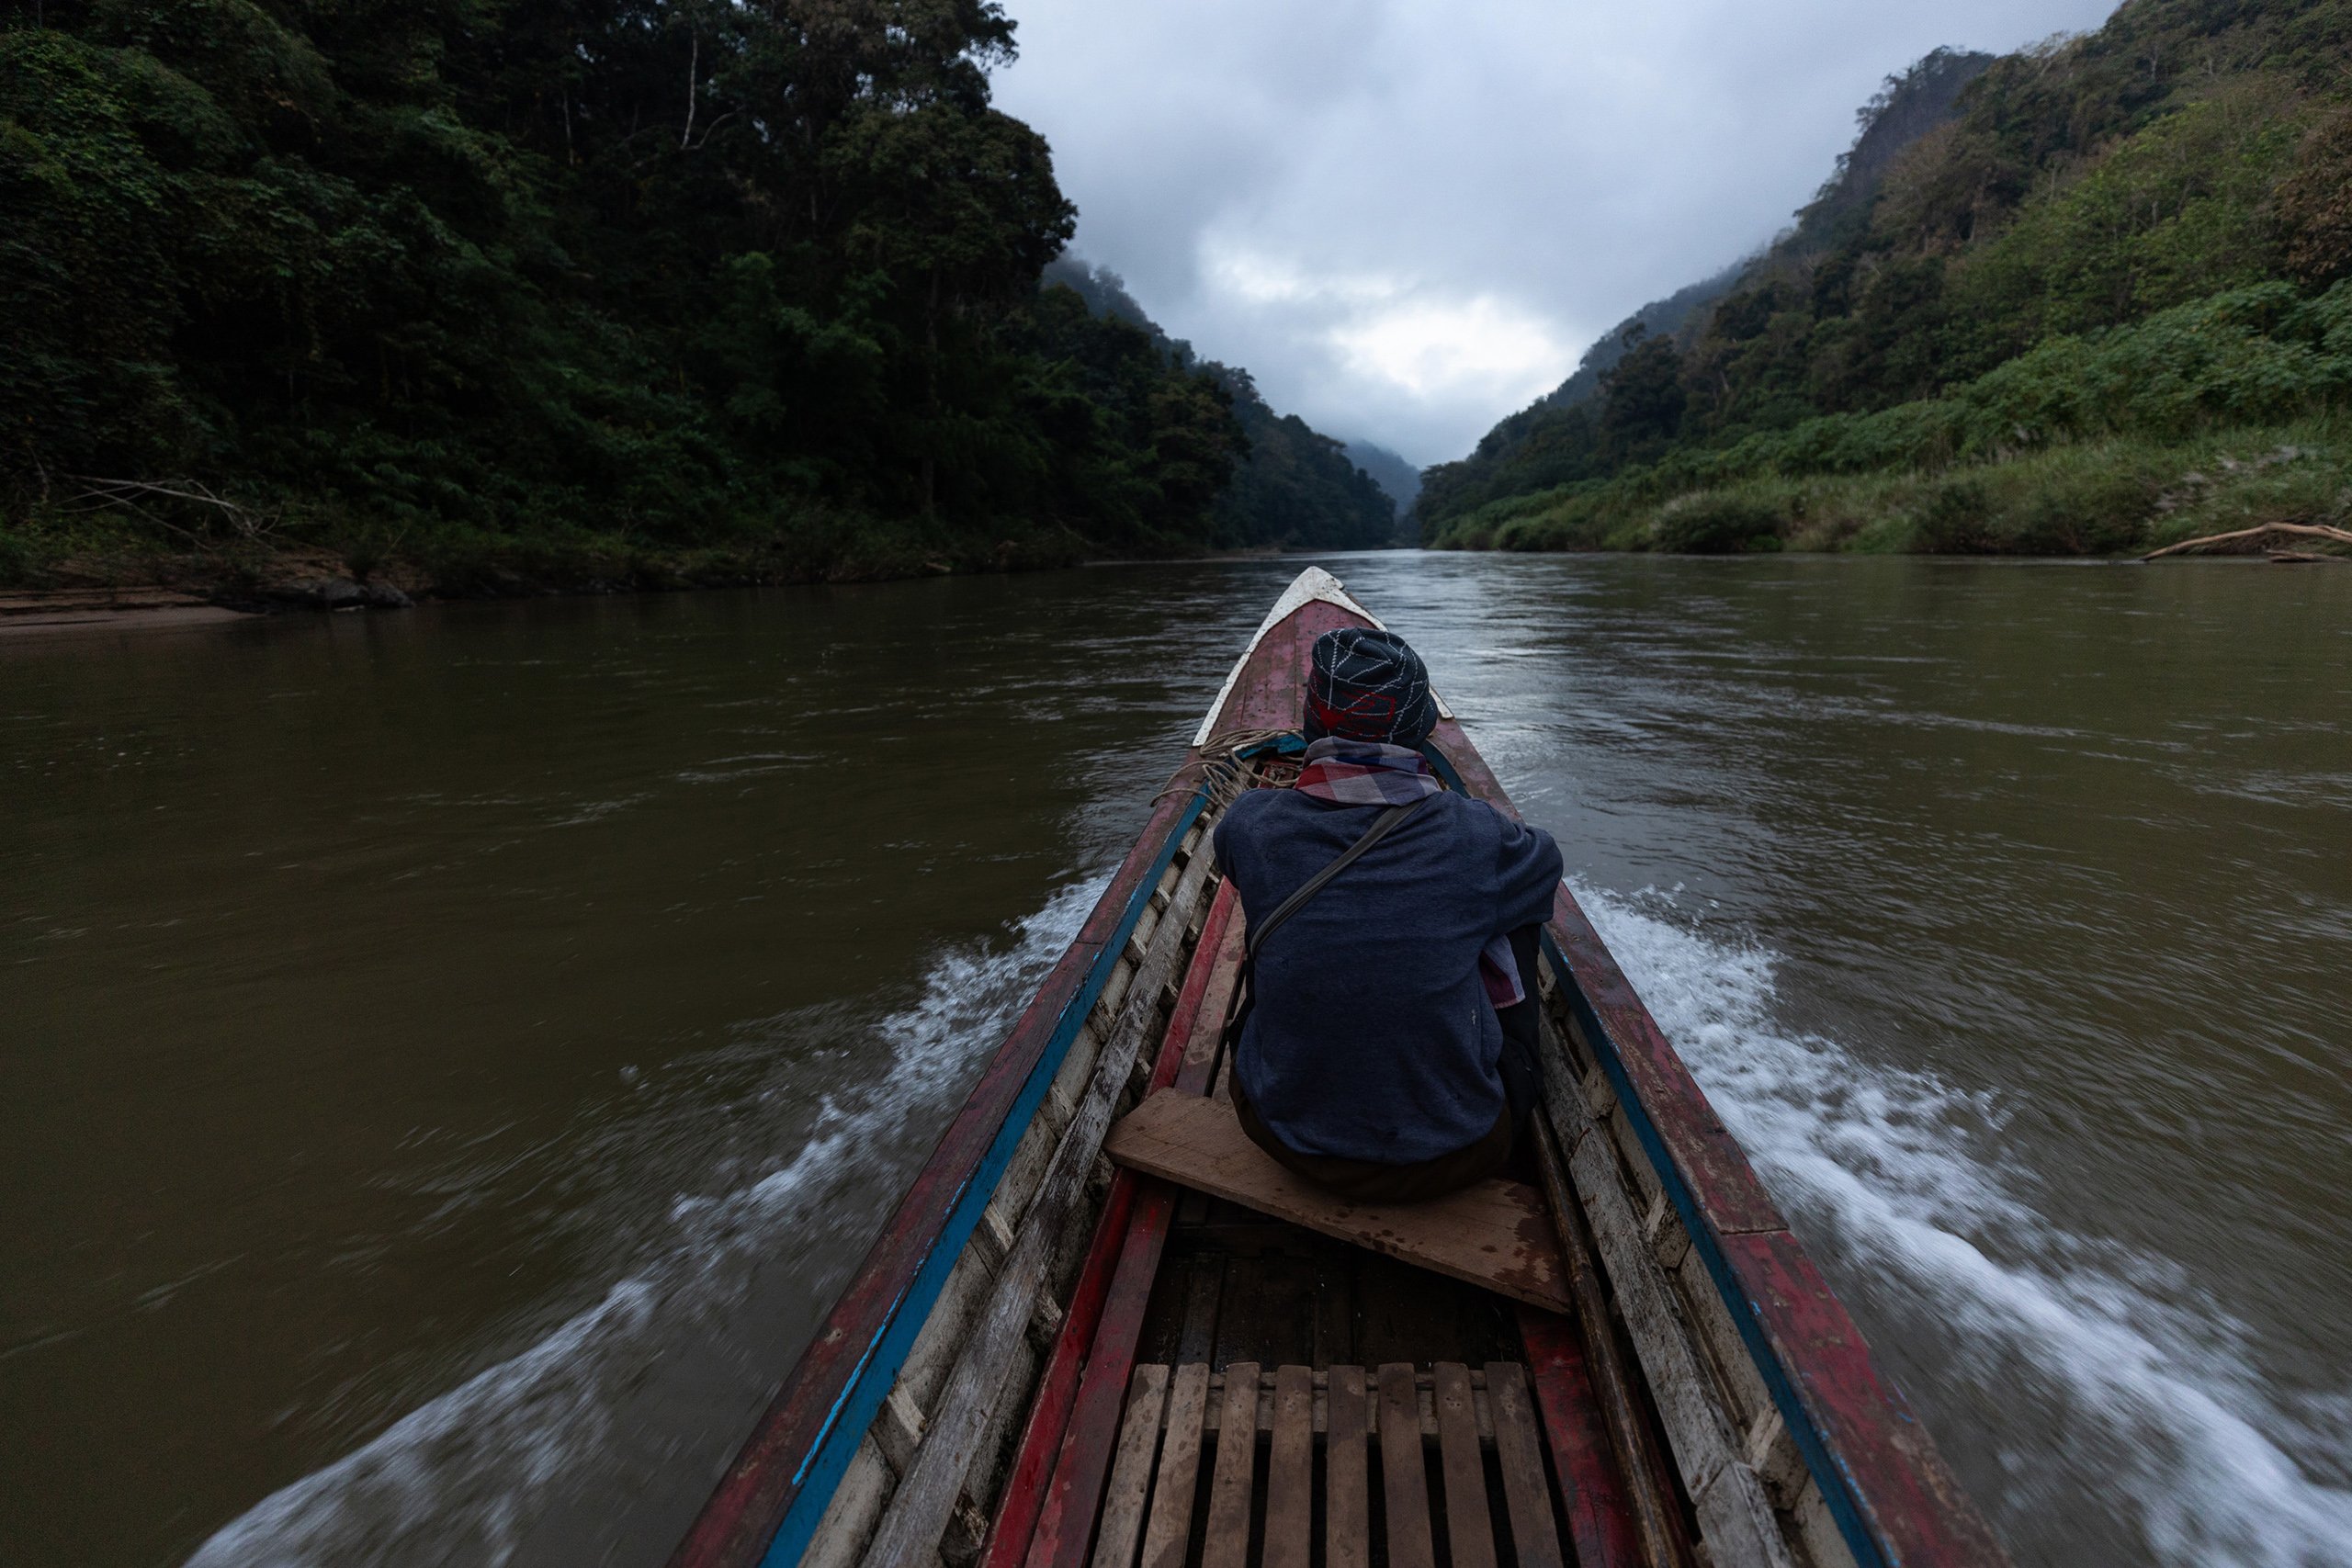 Singhkan Ruenhom, who’s father founded Mae Ngaw village, sits in a boat on the Yuam River.